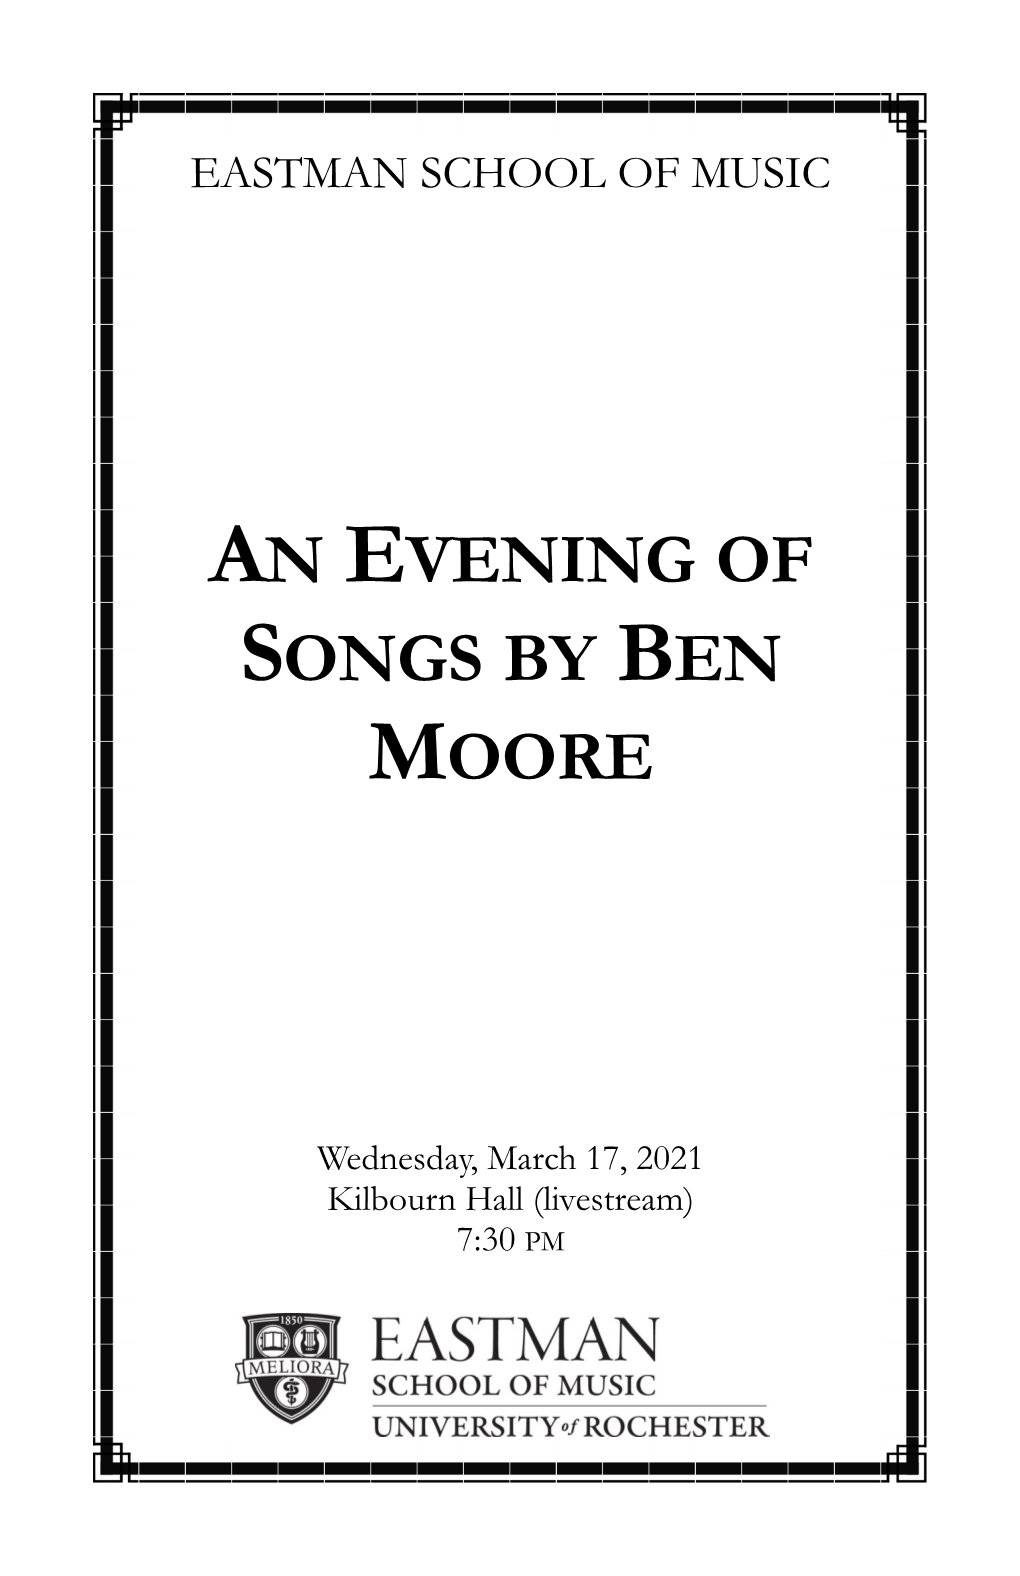 An Evening of Songs by Ben Moore